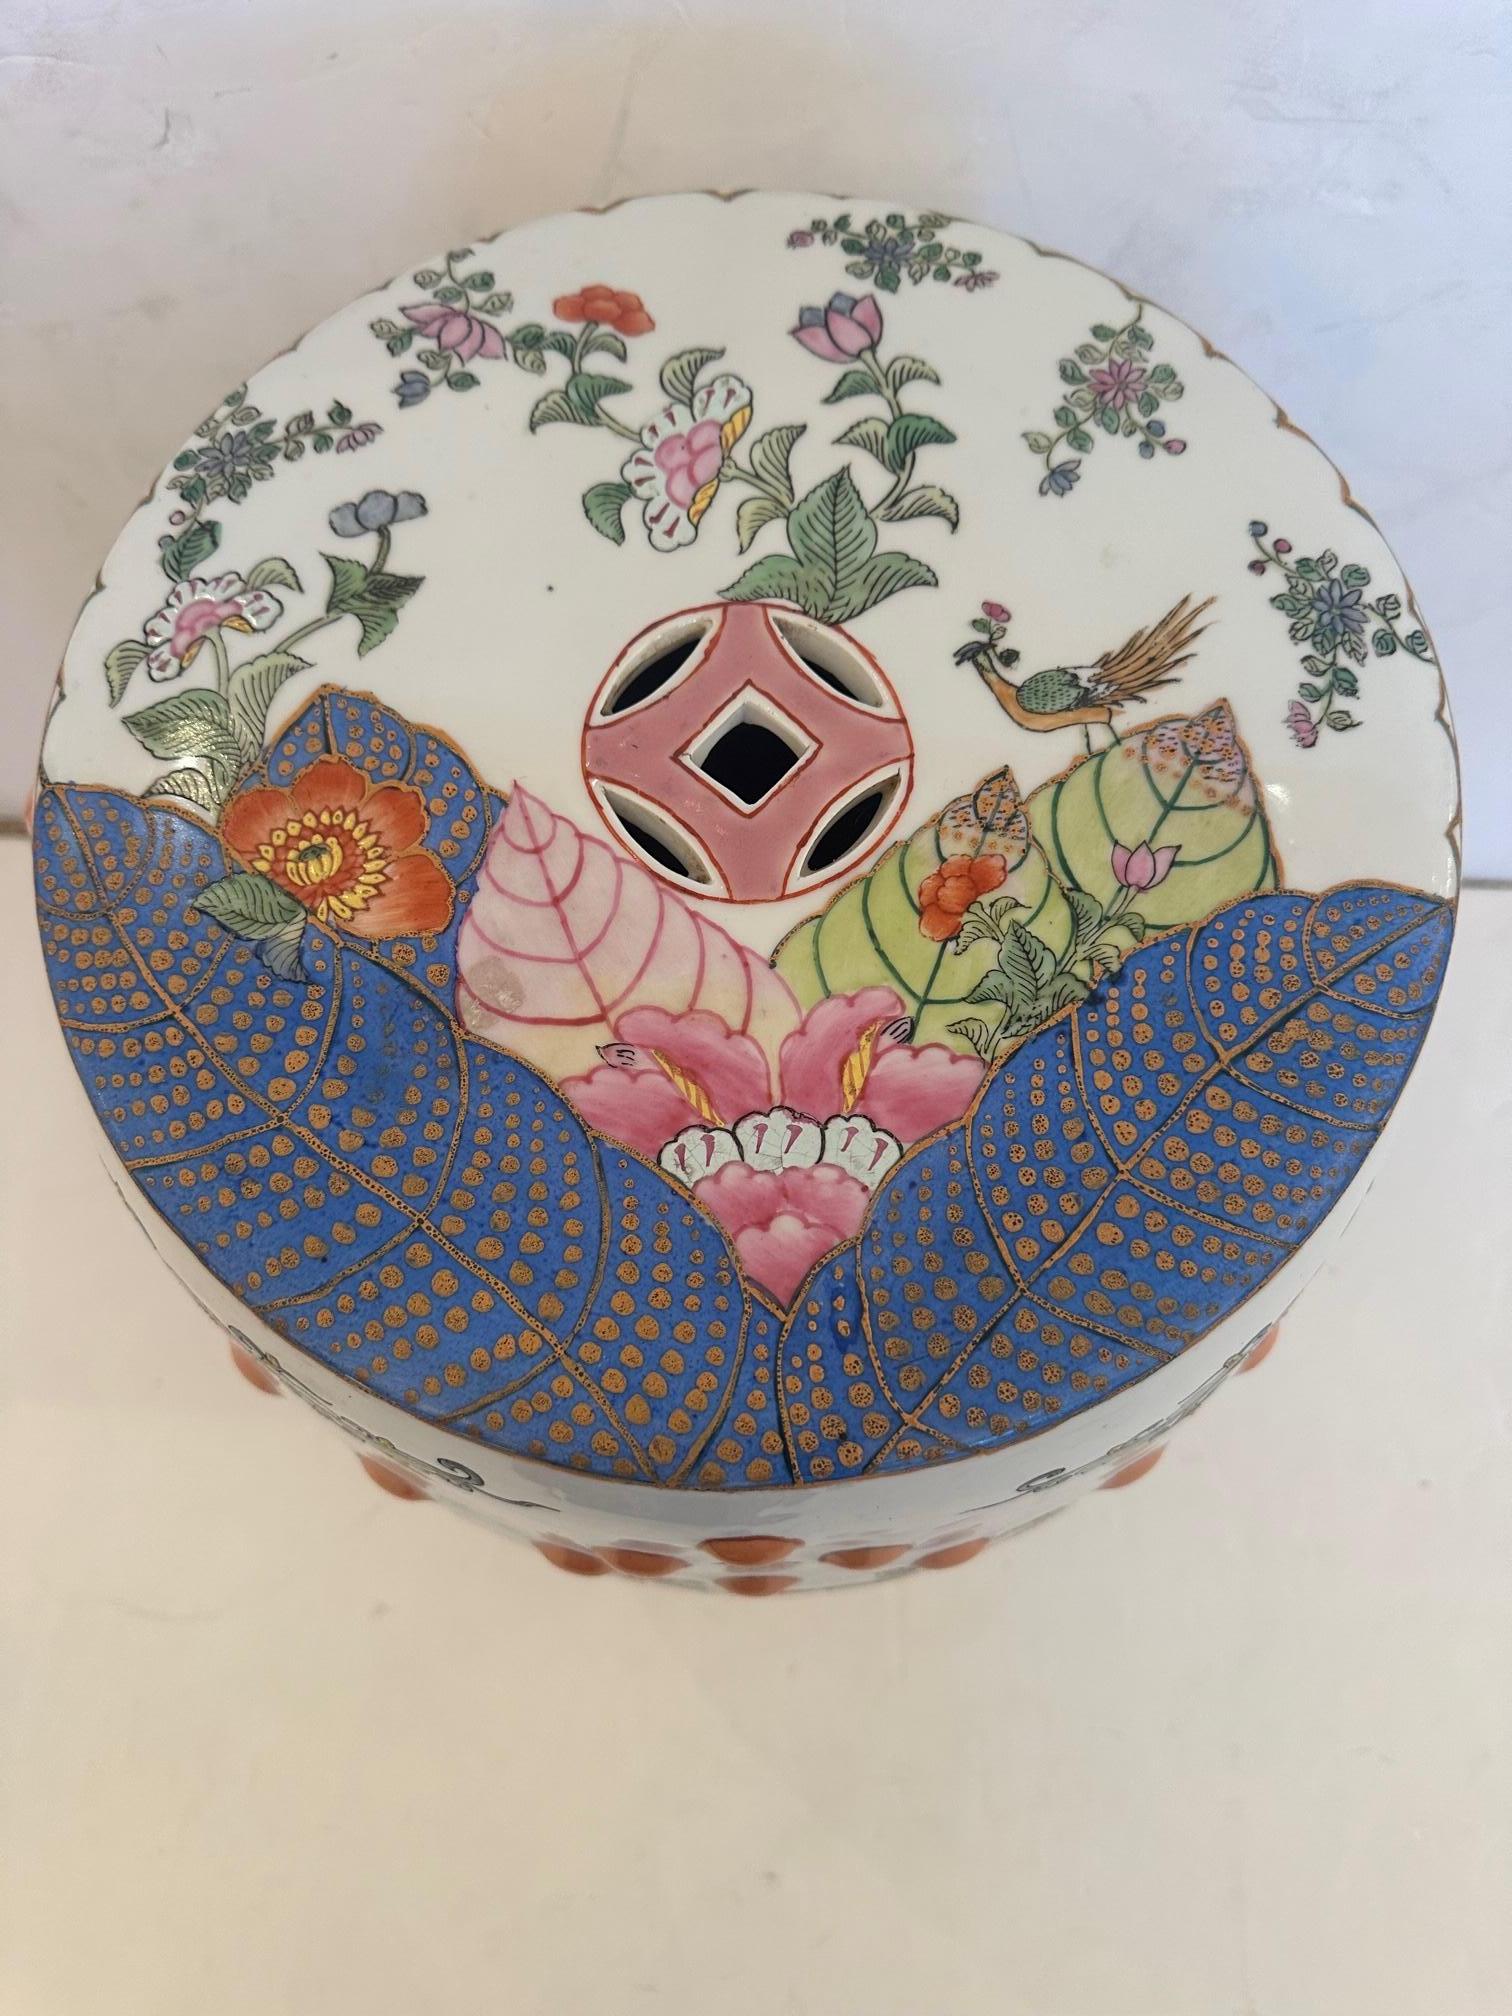 One of the prettiest Chinese garden seats ever with flowers, birds and tobacco leaves makes a lovely end table with 11.75 diameter top.   The color palette of pinks, purple, orange, green and white are utterly sublime.